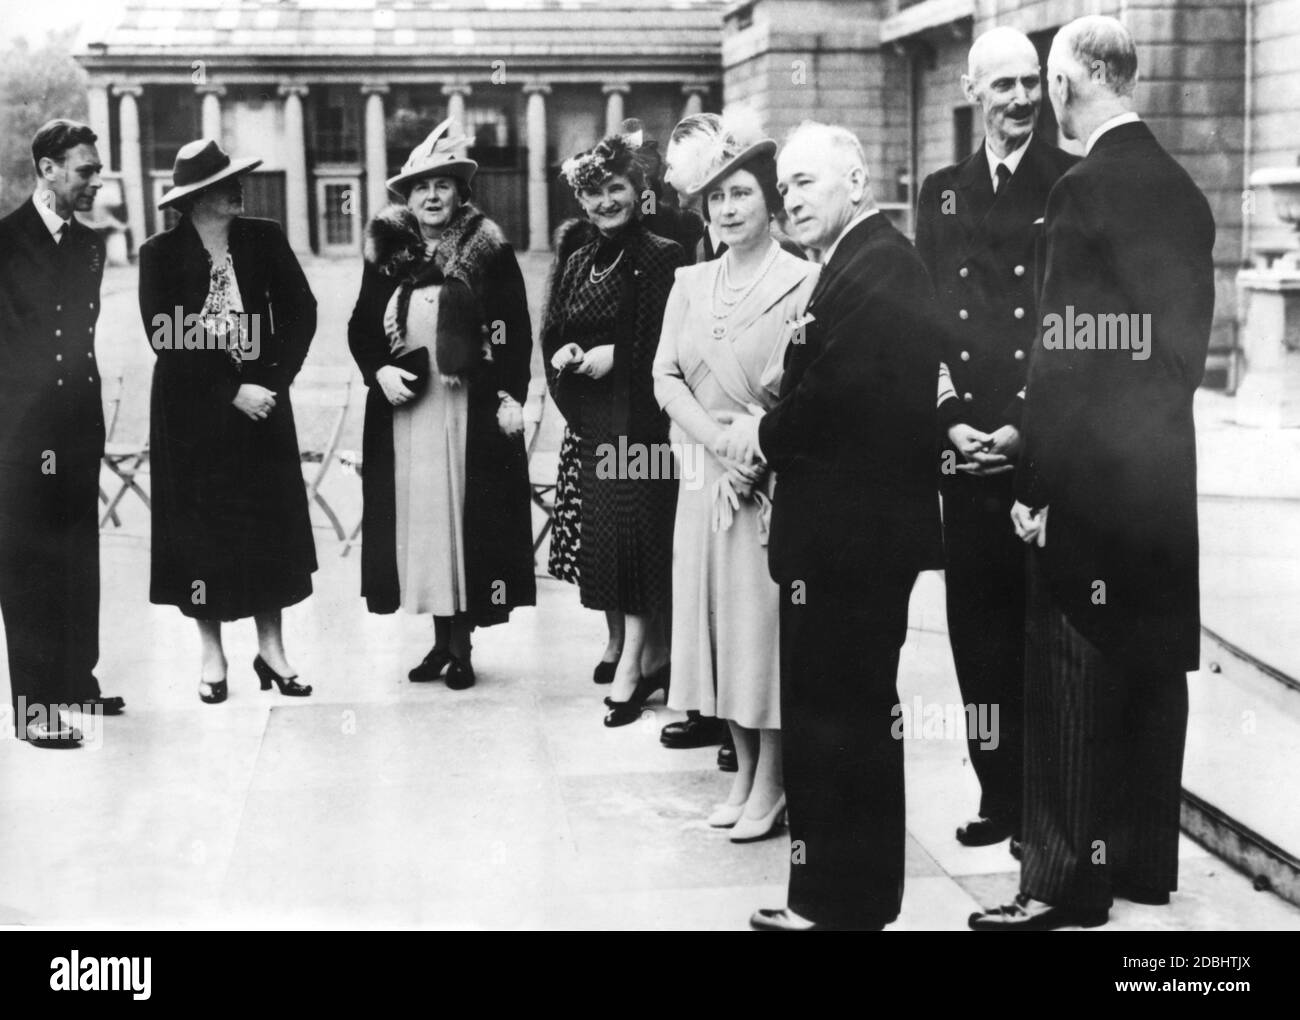 From left to right: King George VI of Great Britain, Queen Maria of Yugoslavia, Queen Wilhelmina of the Netherlands, Hana Benesova (wife of the Czechoslovak President), Queen Elizabeth of Great Britain, Edvard Benes (President of Czechoslovakia), King Haakon of Norway and Wladyslaw Raczkiewicz (President of the Polish Government in exile). Stock Photo